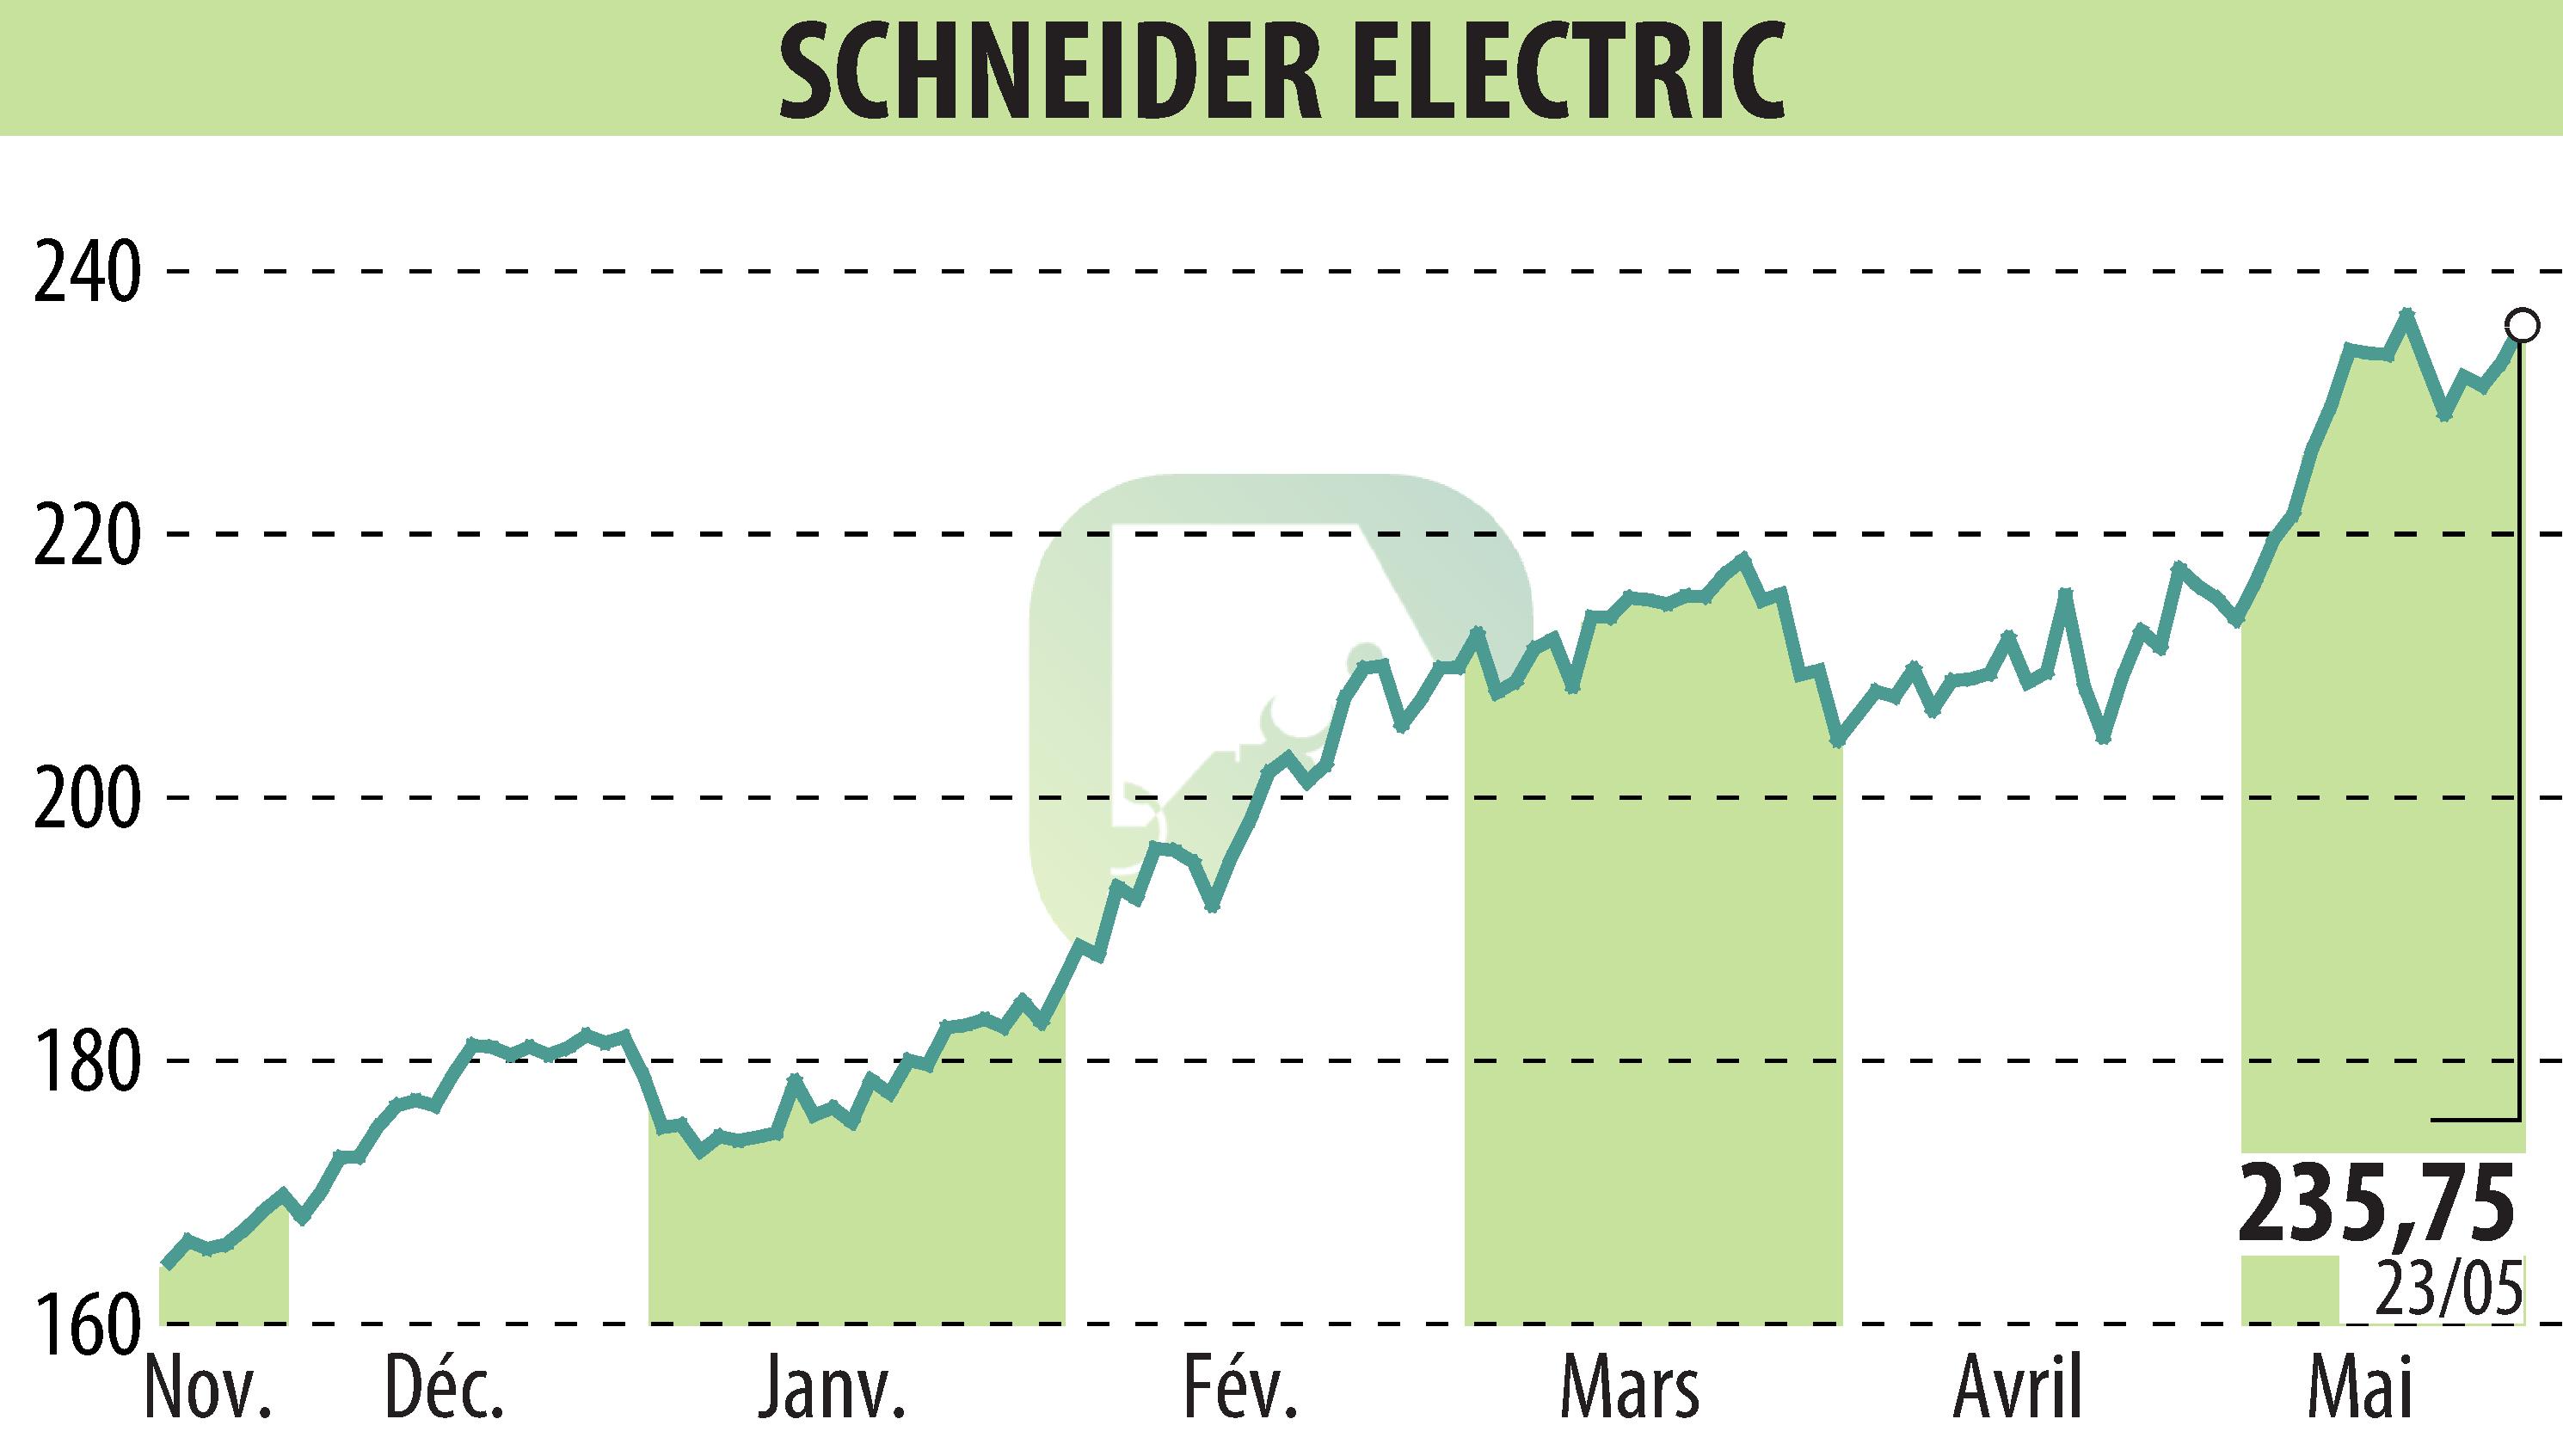 Stock price chart of SCHNEIDER ELECTRIC (EPA:SU) showing fluctuations.